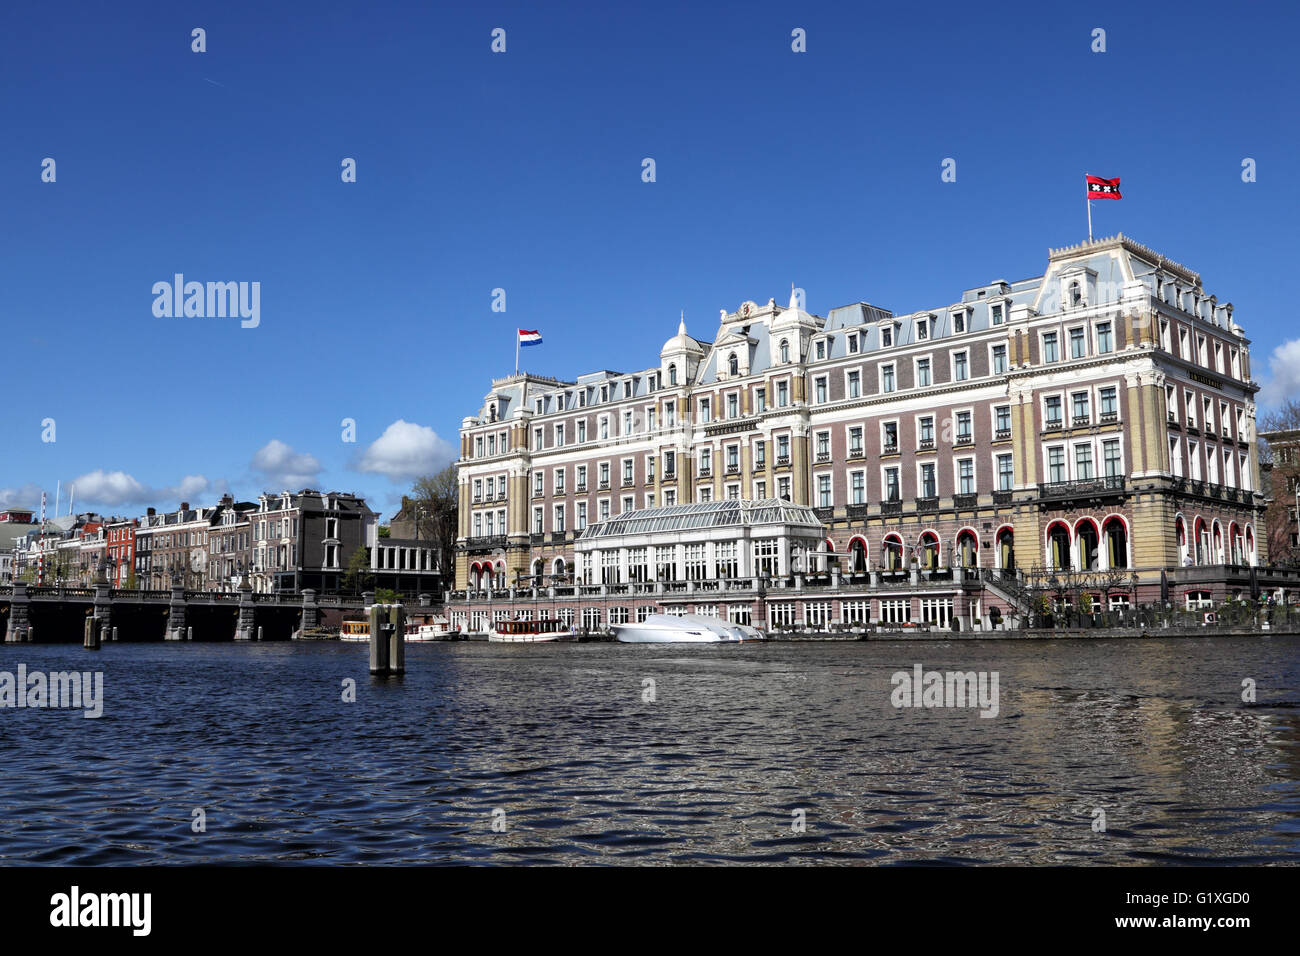 The Intercontinental Amstel Hotel at the Amstel river in downtown Amsterdam, Netherlands, Europe. Stock Photo